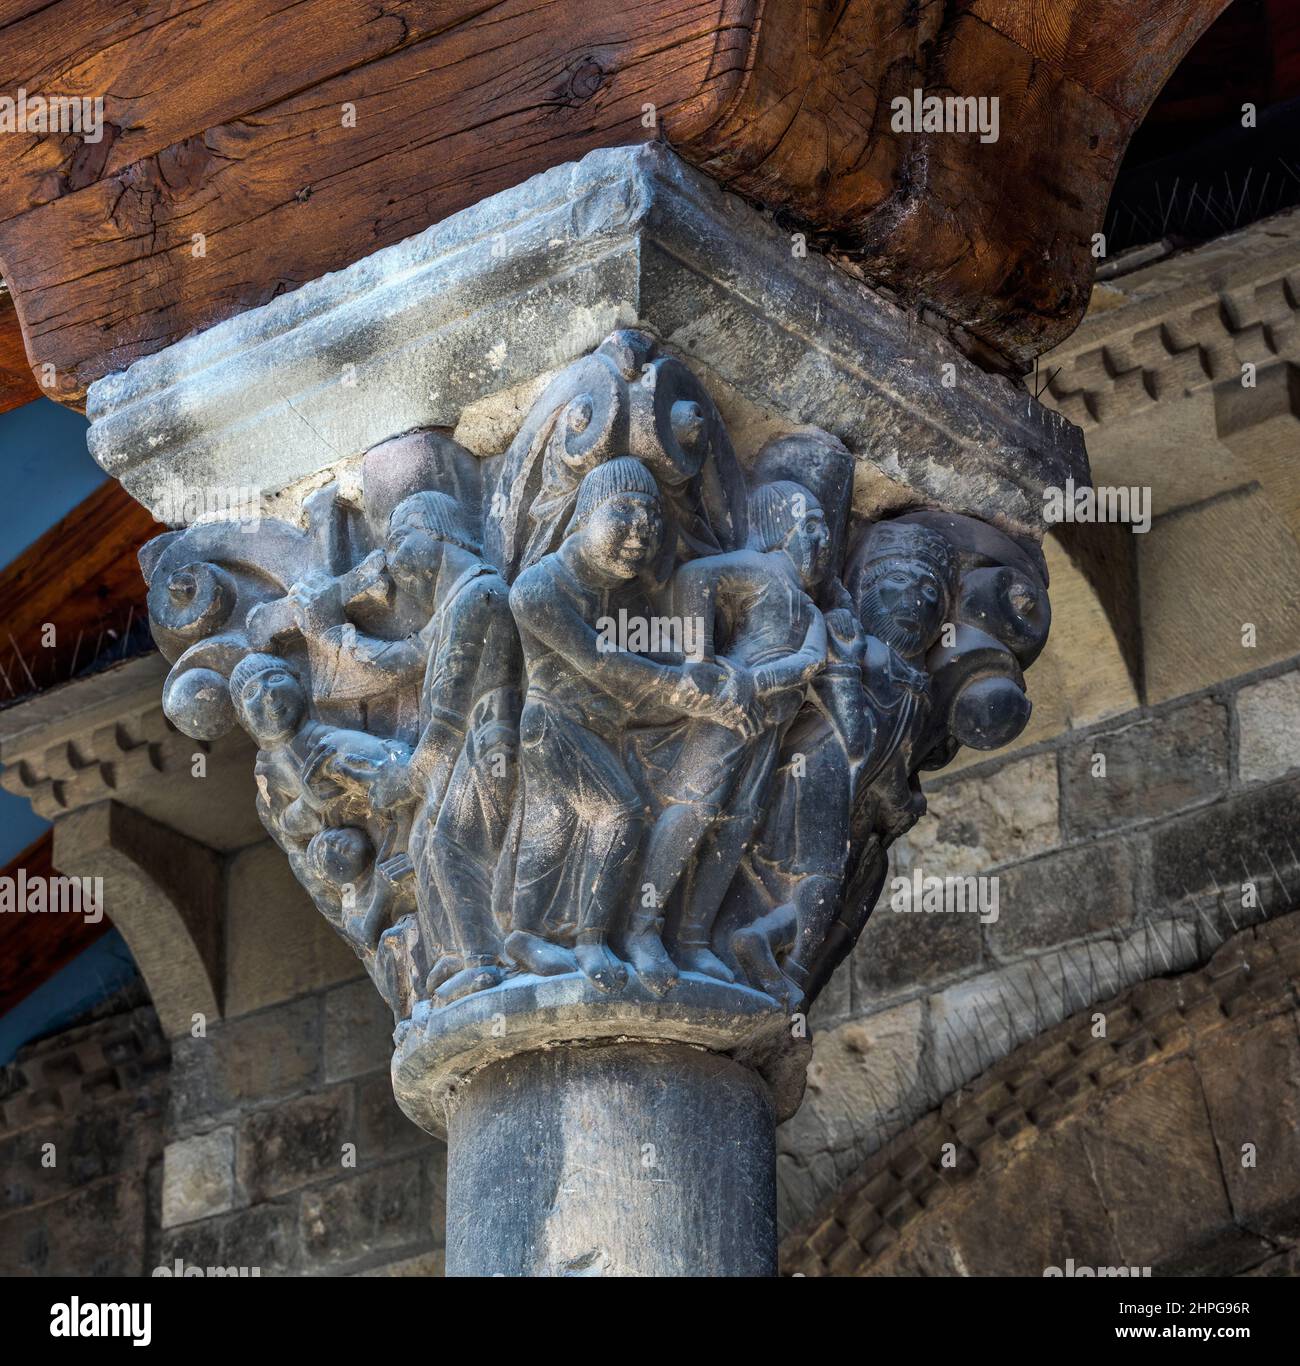 Jaca, Huesca Province, Aragon, Spain.   Historiated capital outside the Romanesque Catedral de San Pedro Apóstol.  Cathedral of St Peter the Apostle. Stock Photo